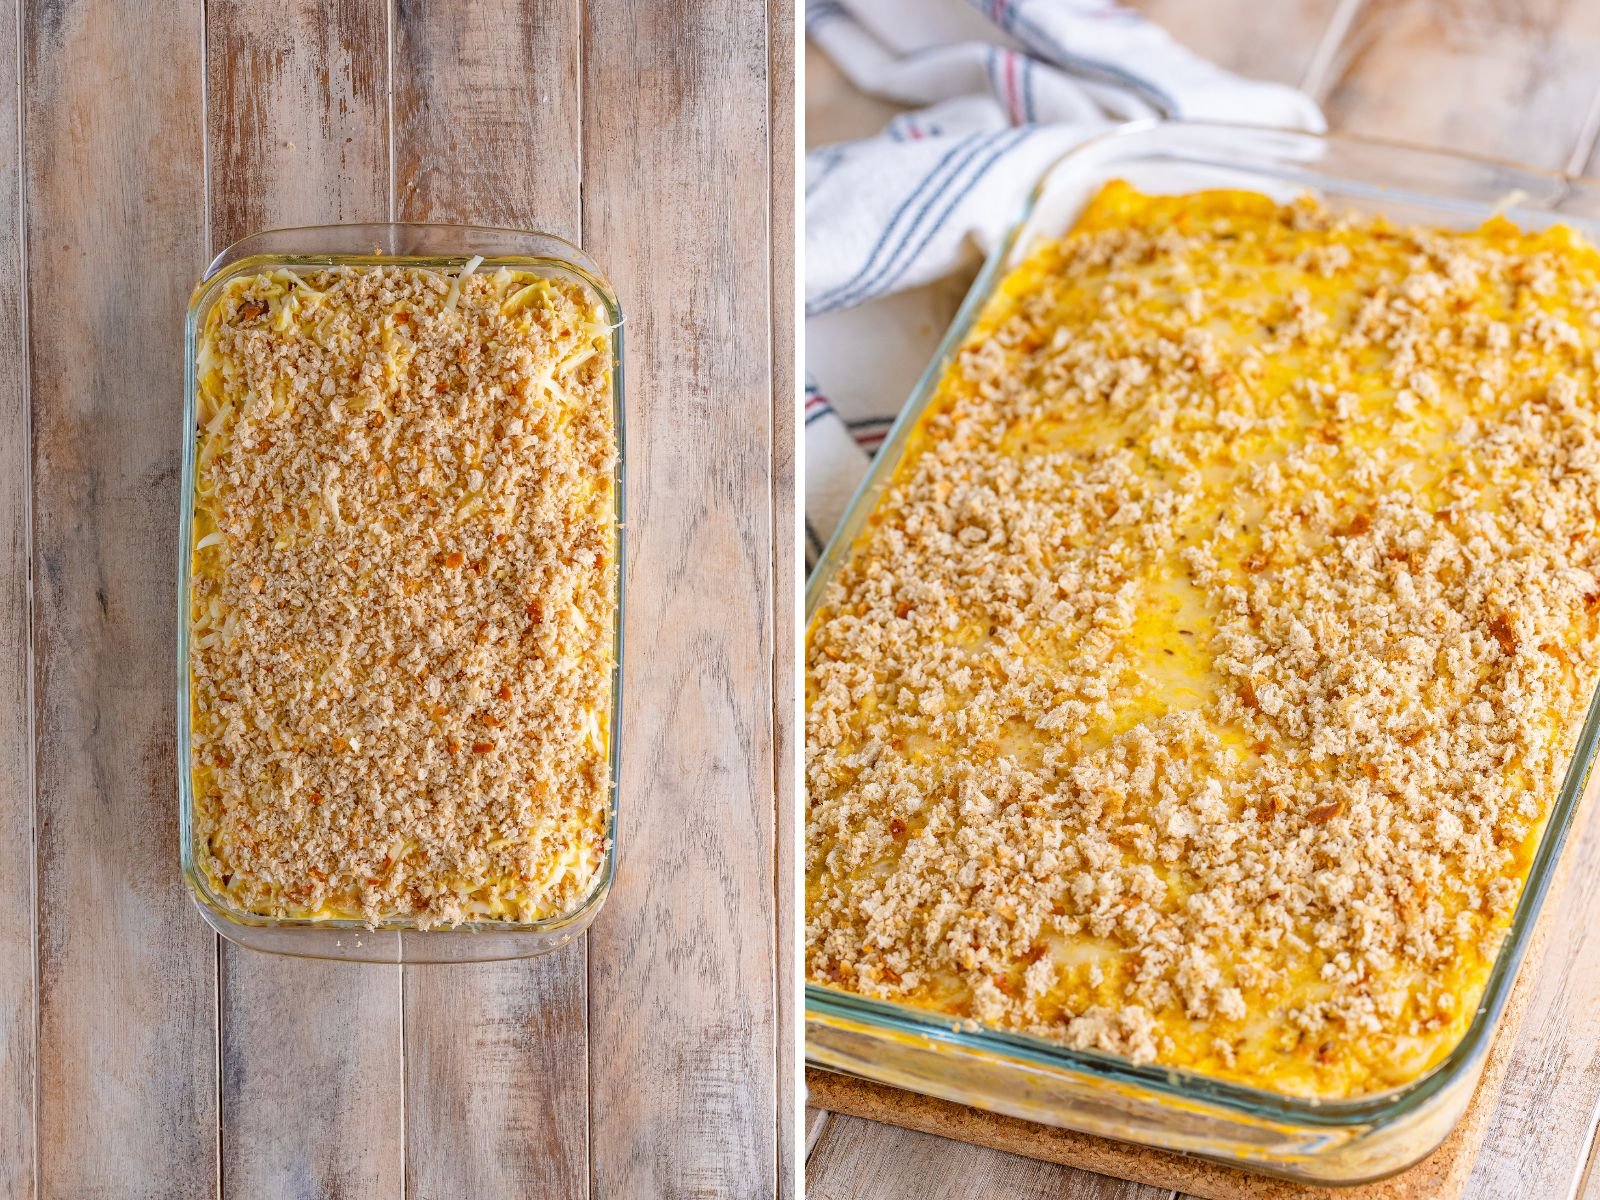 A layered Reuben Casserole before it gets baked then a freshly baked Reuben Casserole just out of the oven.